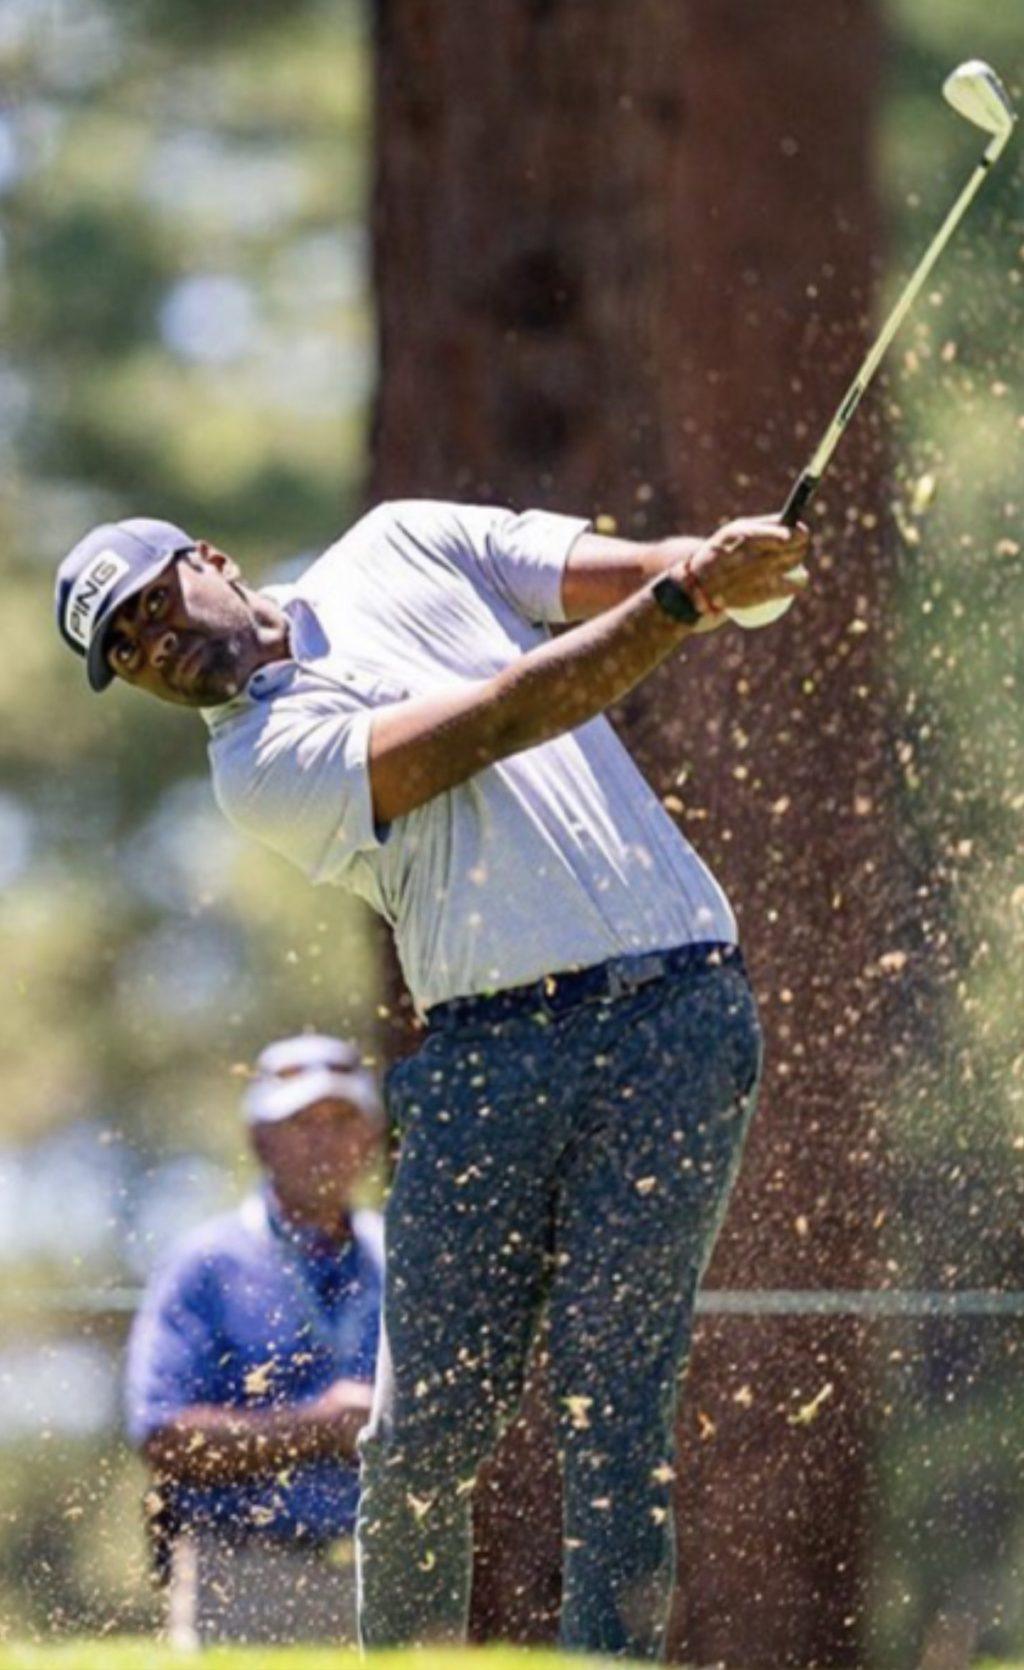 Pro golfer Theegala swings his 9 iron toward the 10th green during the Barracuda Championship on Tahoe Mountain Club's Old Greenwood Course in Truckee, CA. He tied for 41st in the tournament.